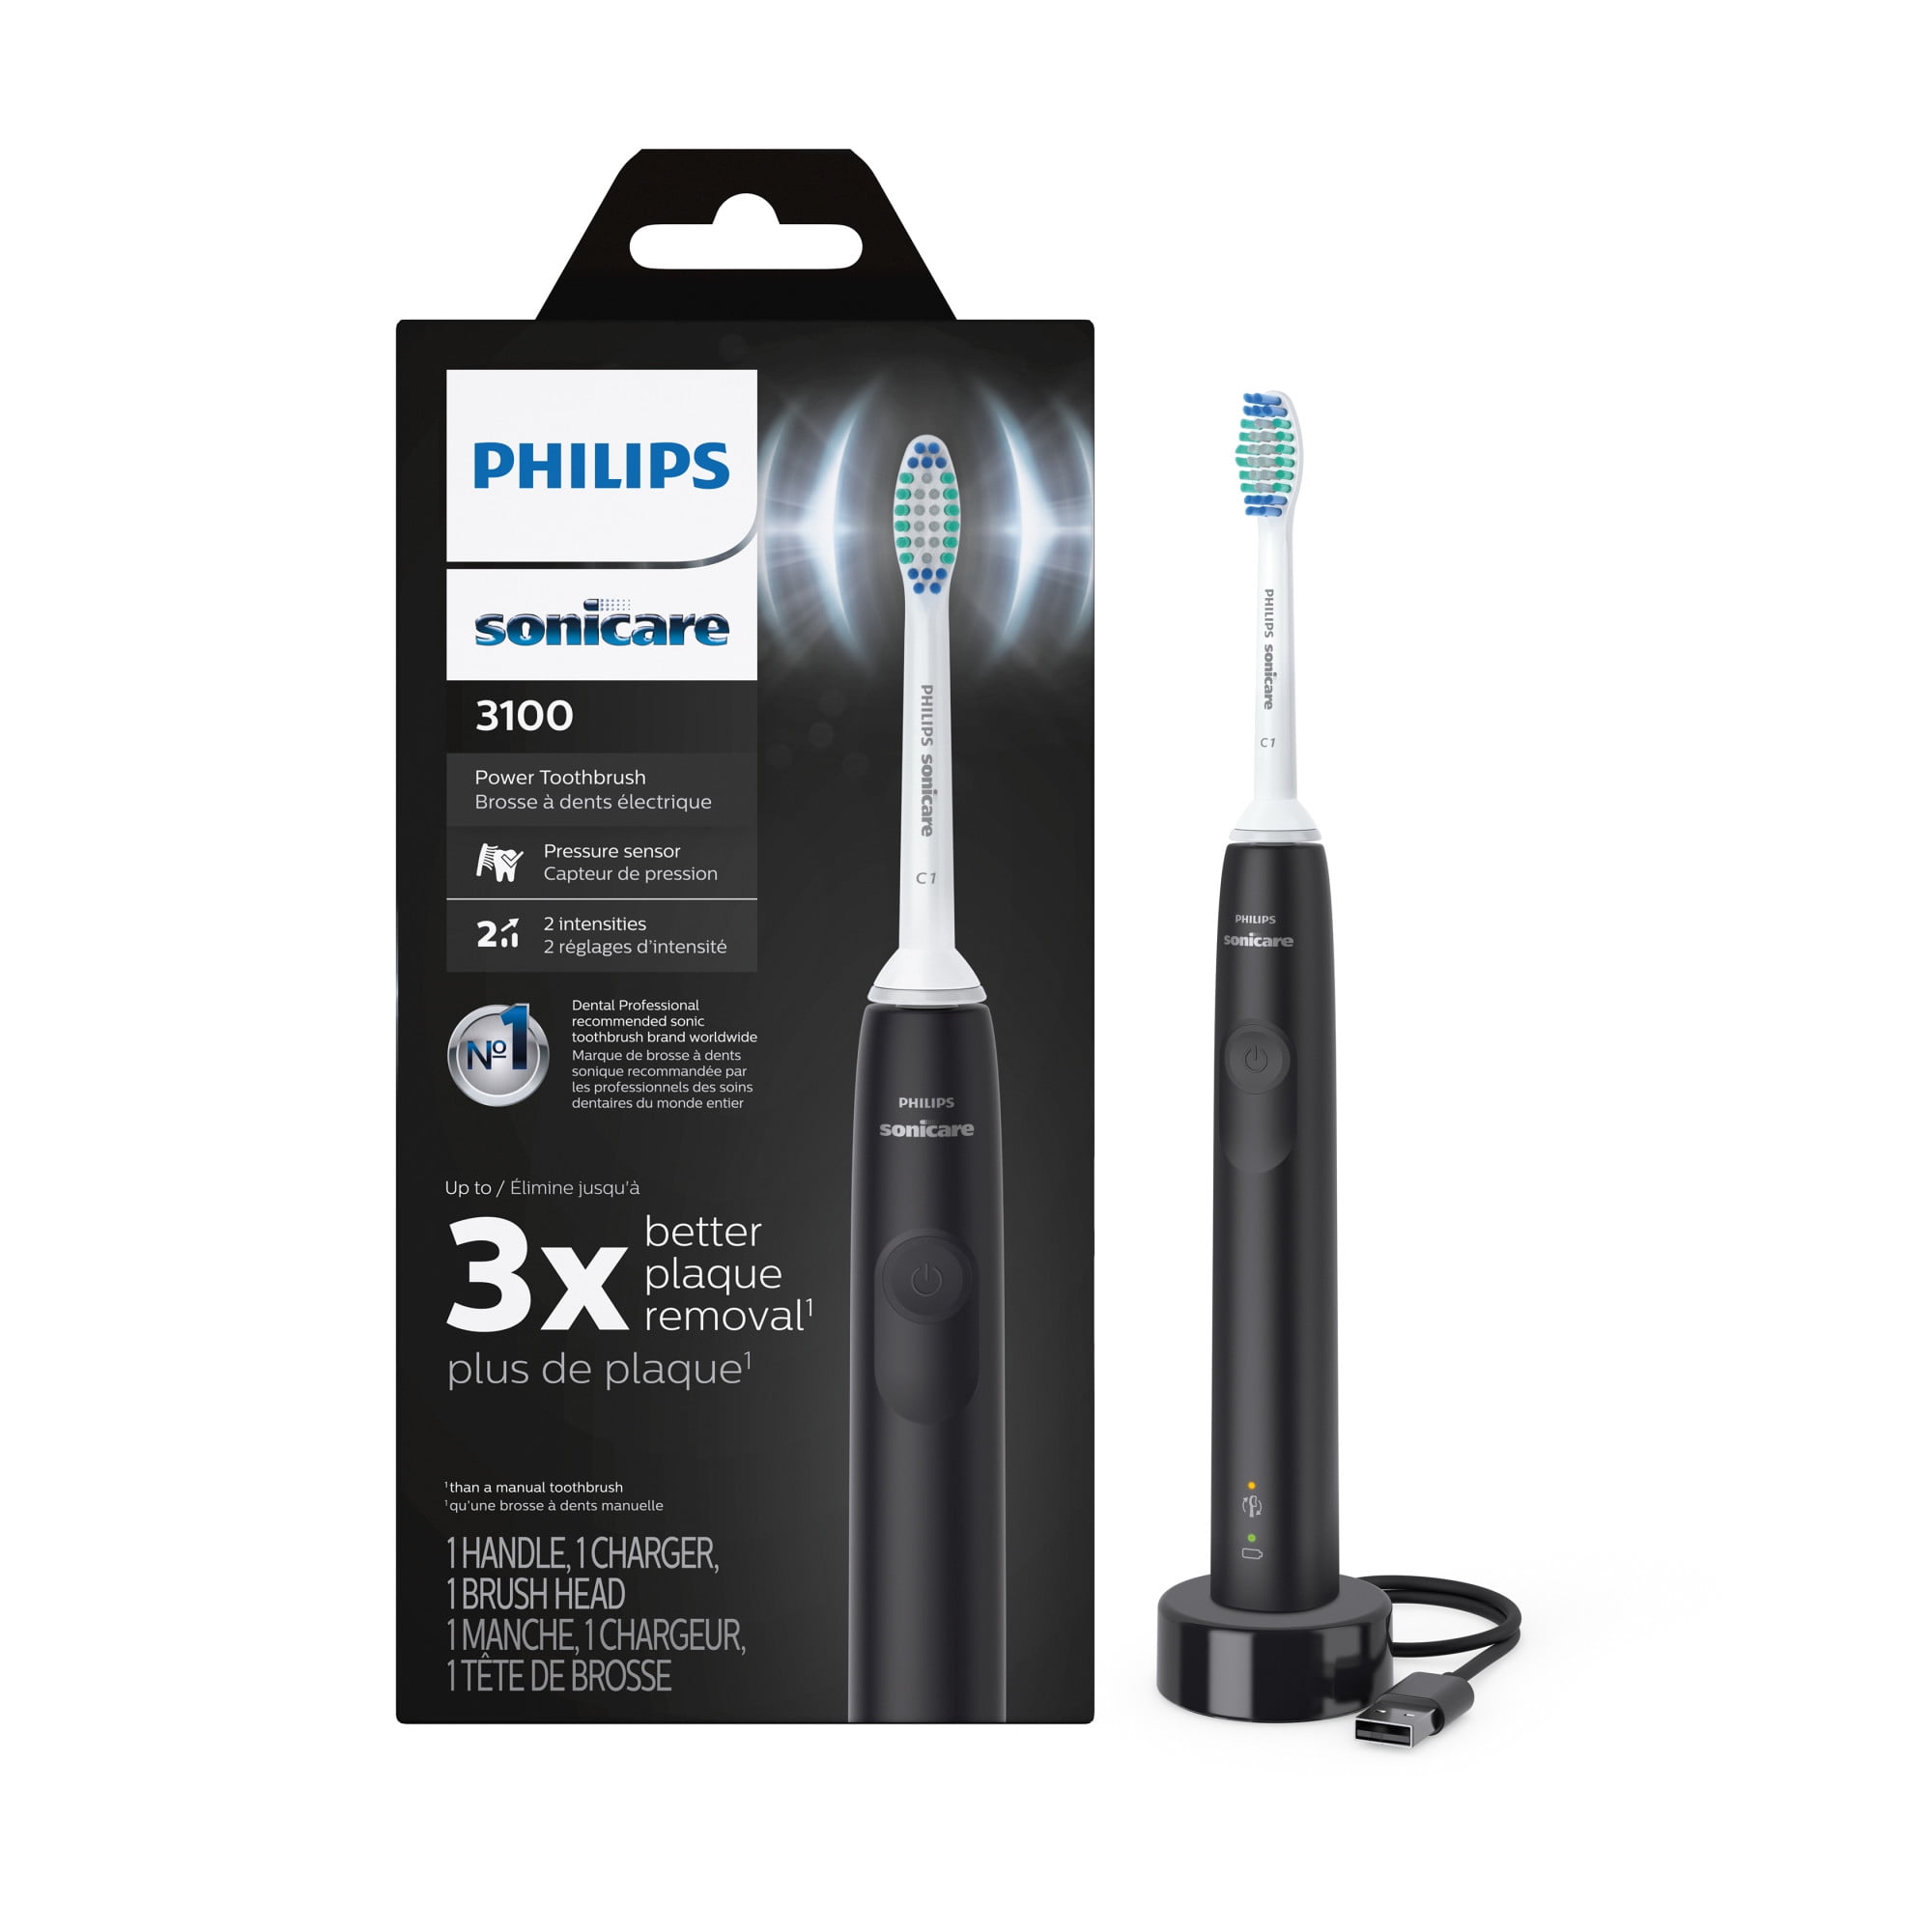 Philips Sonicare 3100 Rechargeable Electric Toothbrush, Black HX3681/04